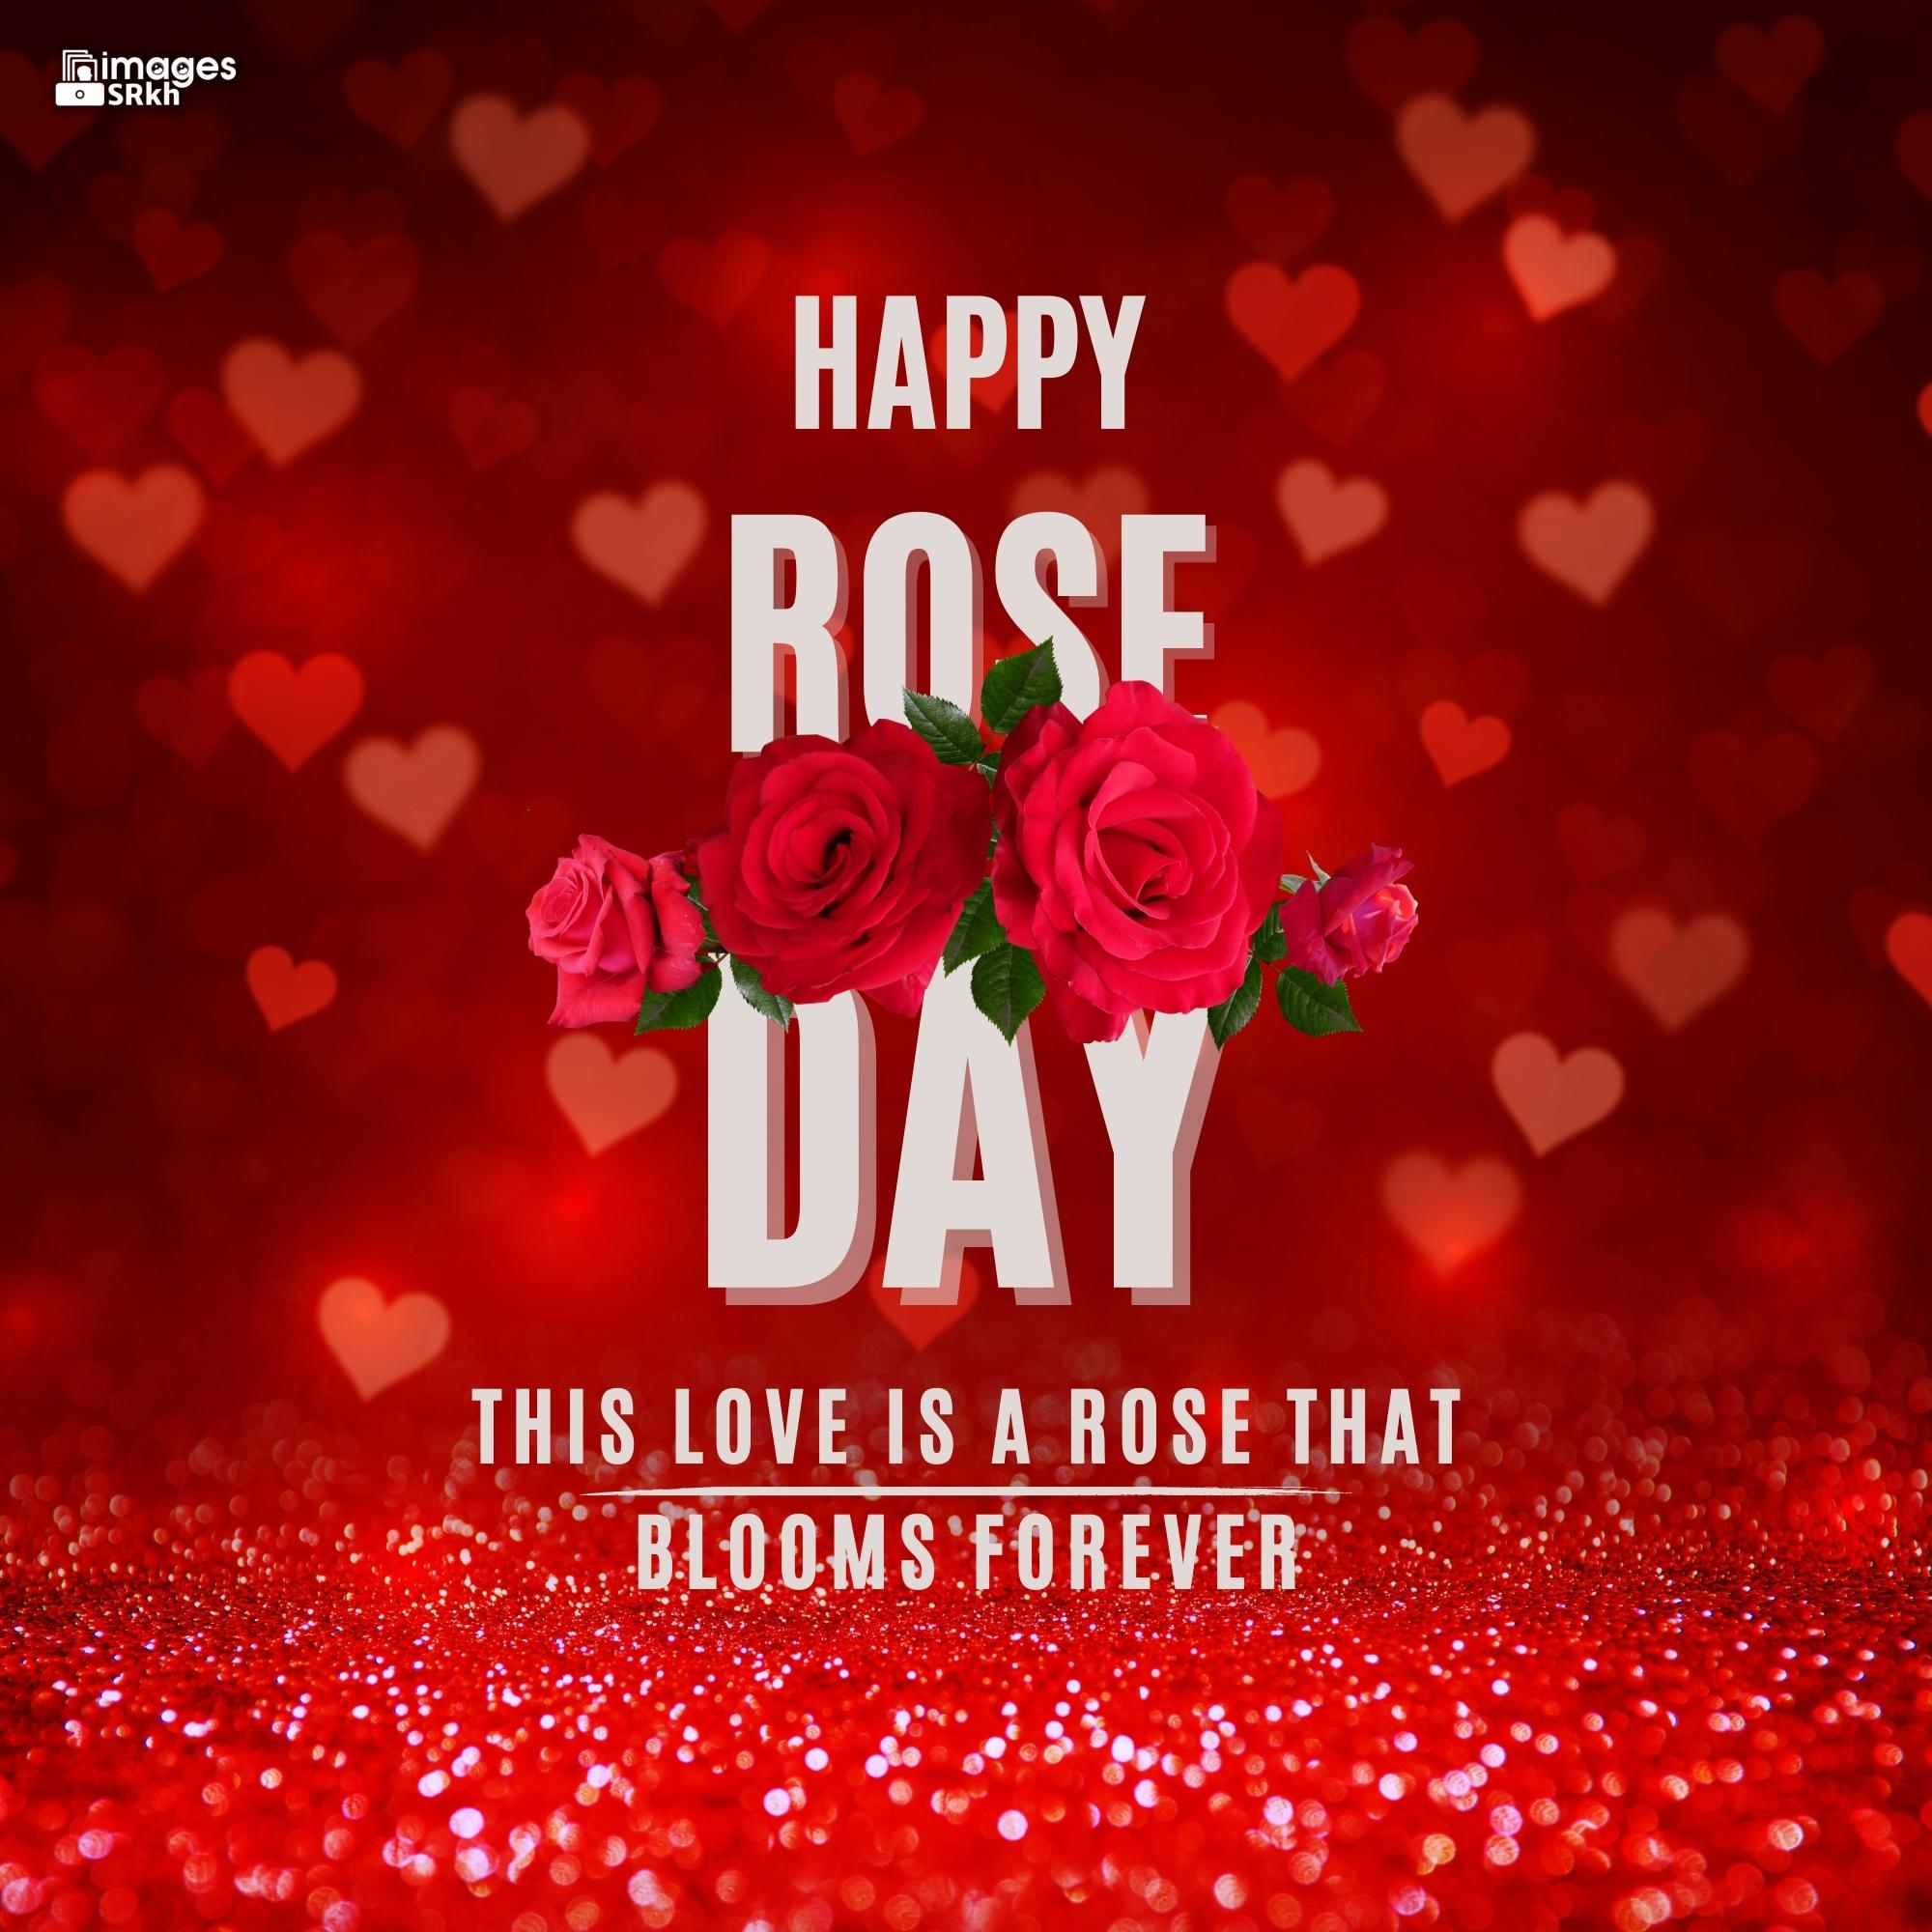 Happy Rose Day Image Hd Download (64)